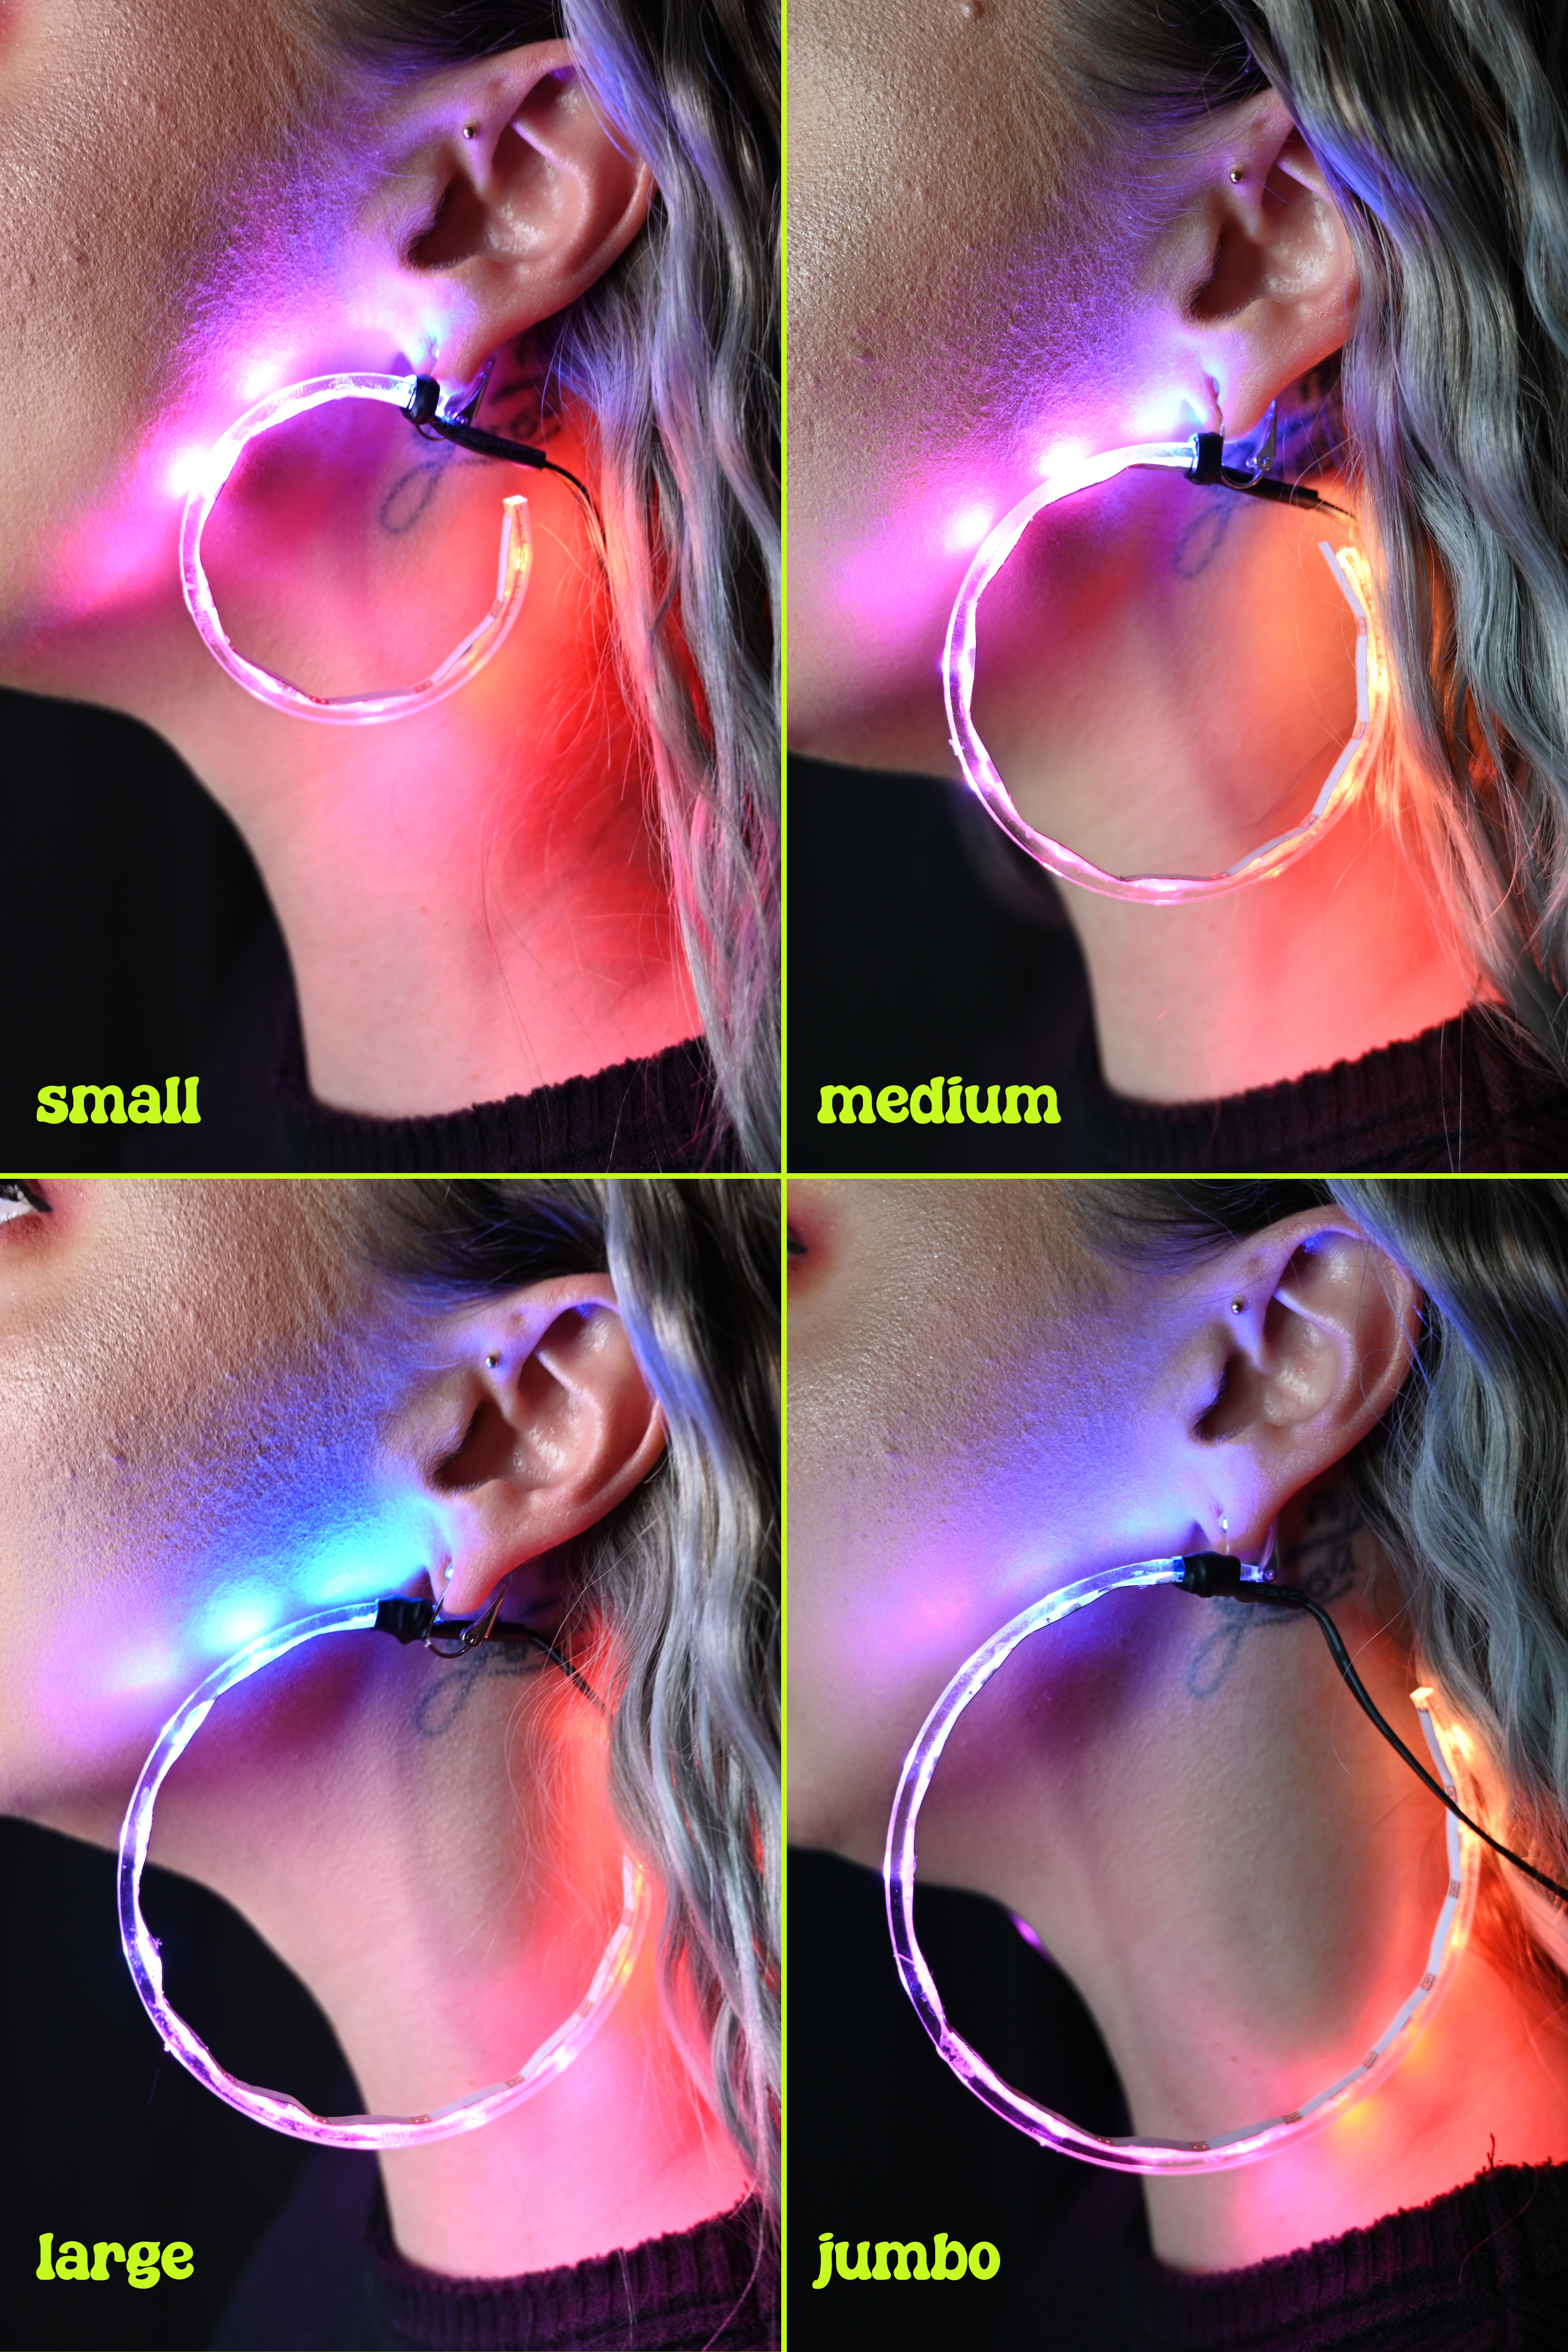 led earrings in 4 different sizes shown on model in 4 different pictures to show size comparison